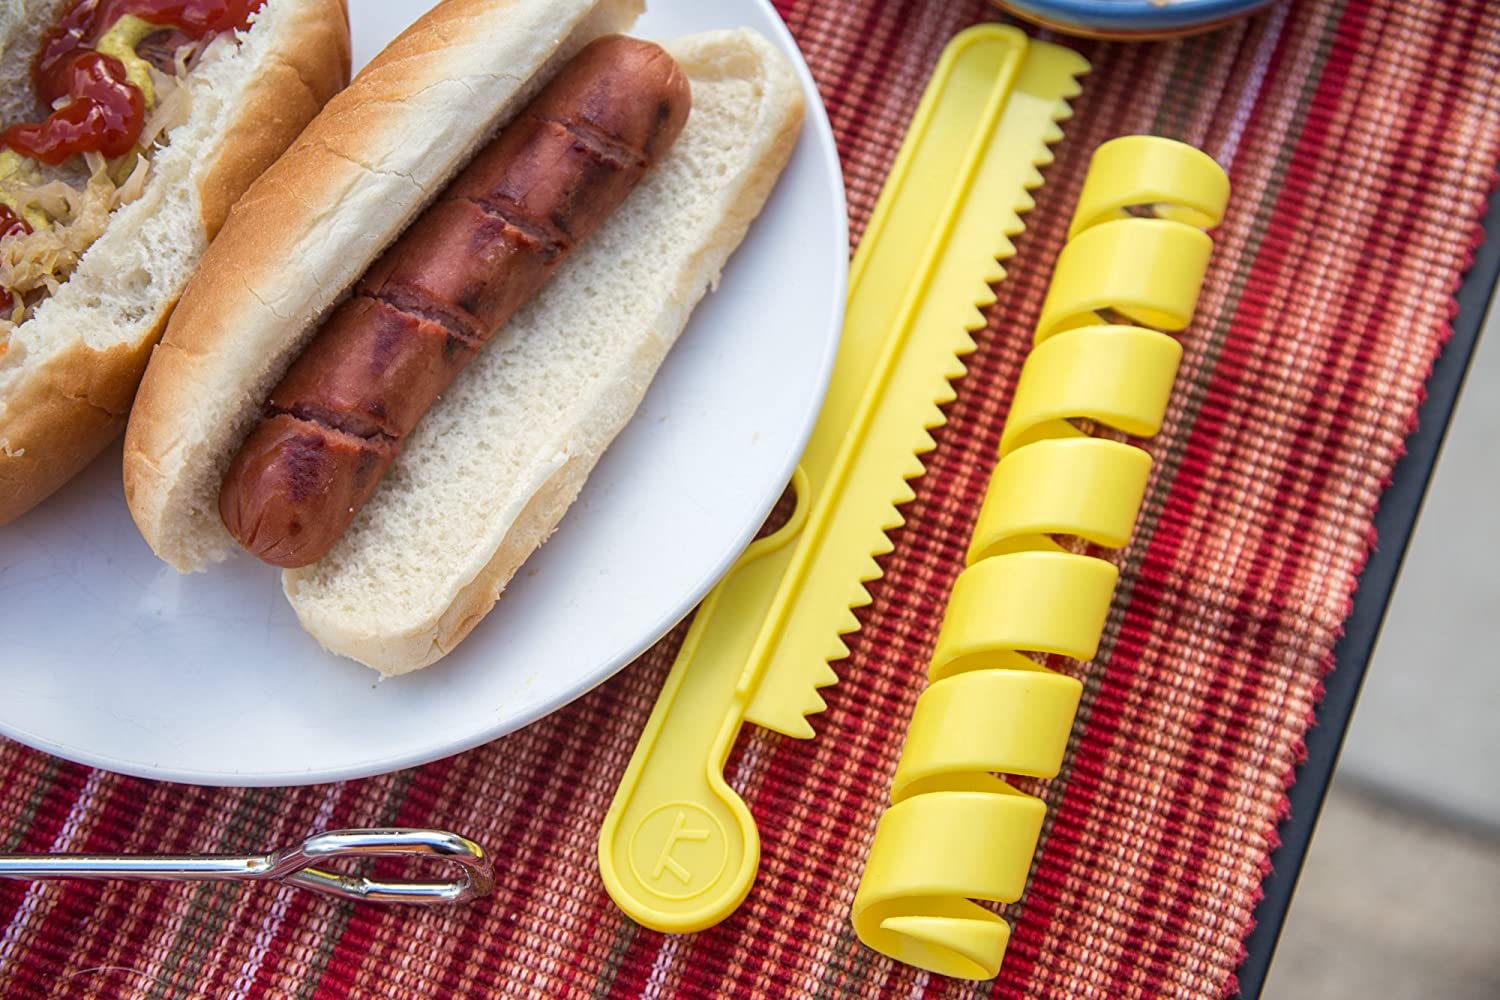 Curl-a-dog Spiral Hot Dog Slicer  WATCH: Your #Gourdo's way to do